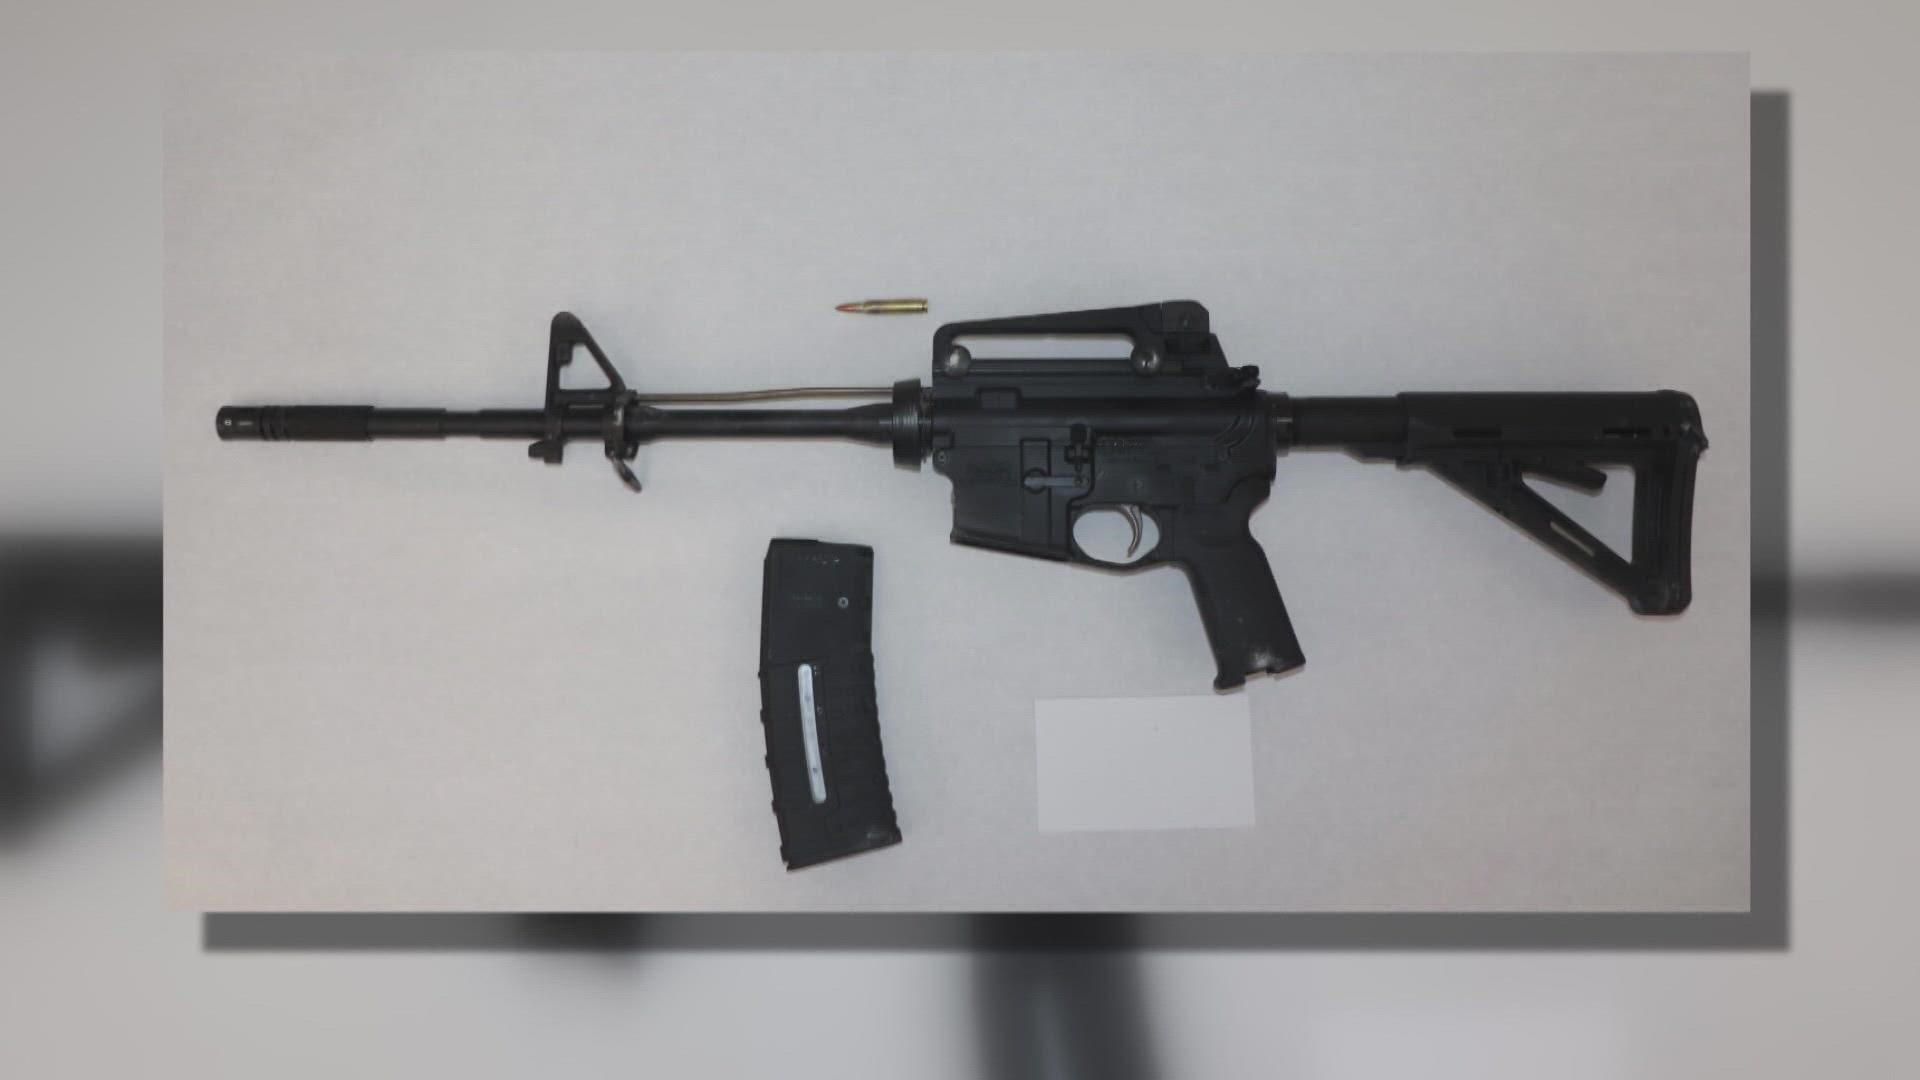 Police said an FBI background check successfully blocked him from buying the gun from the dealer on Oct. 8. He then bought a gun in a private sale.